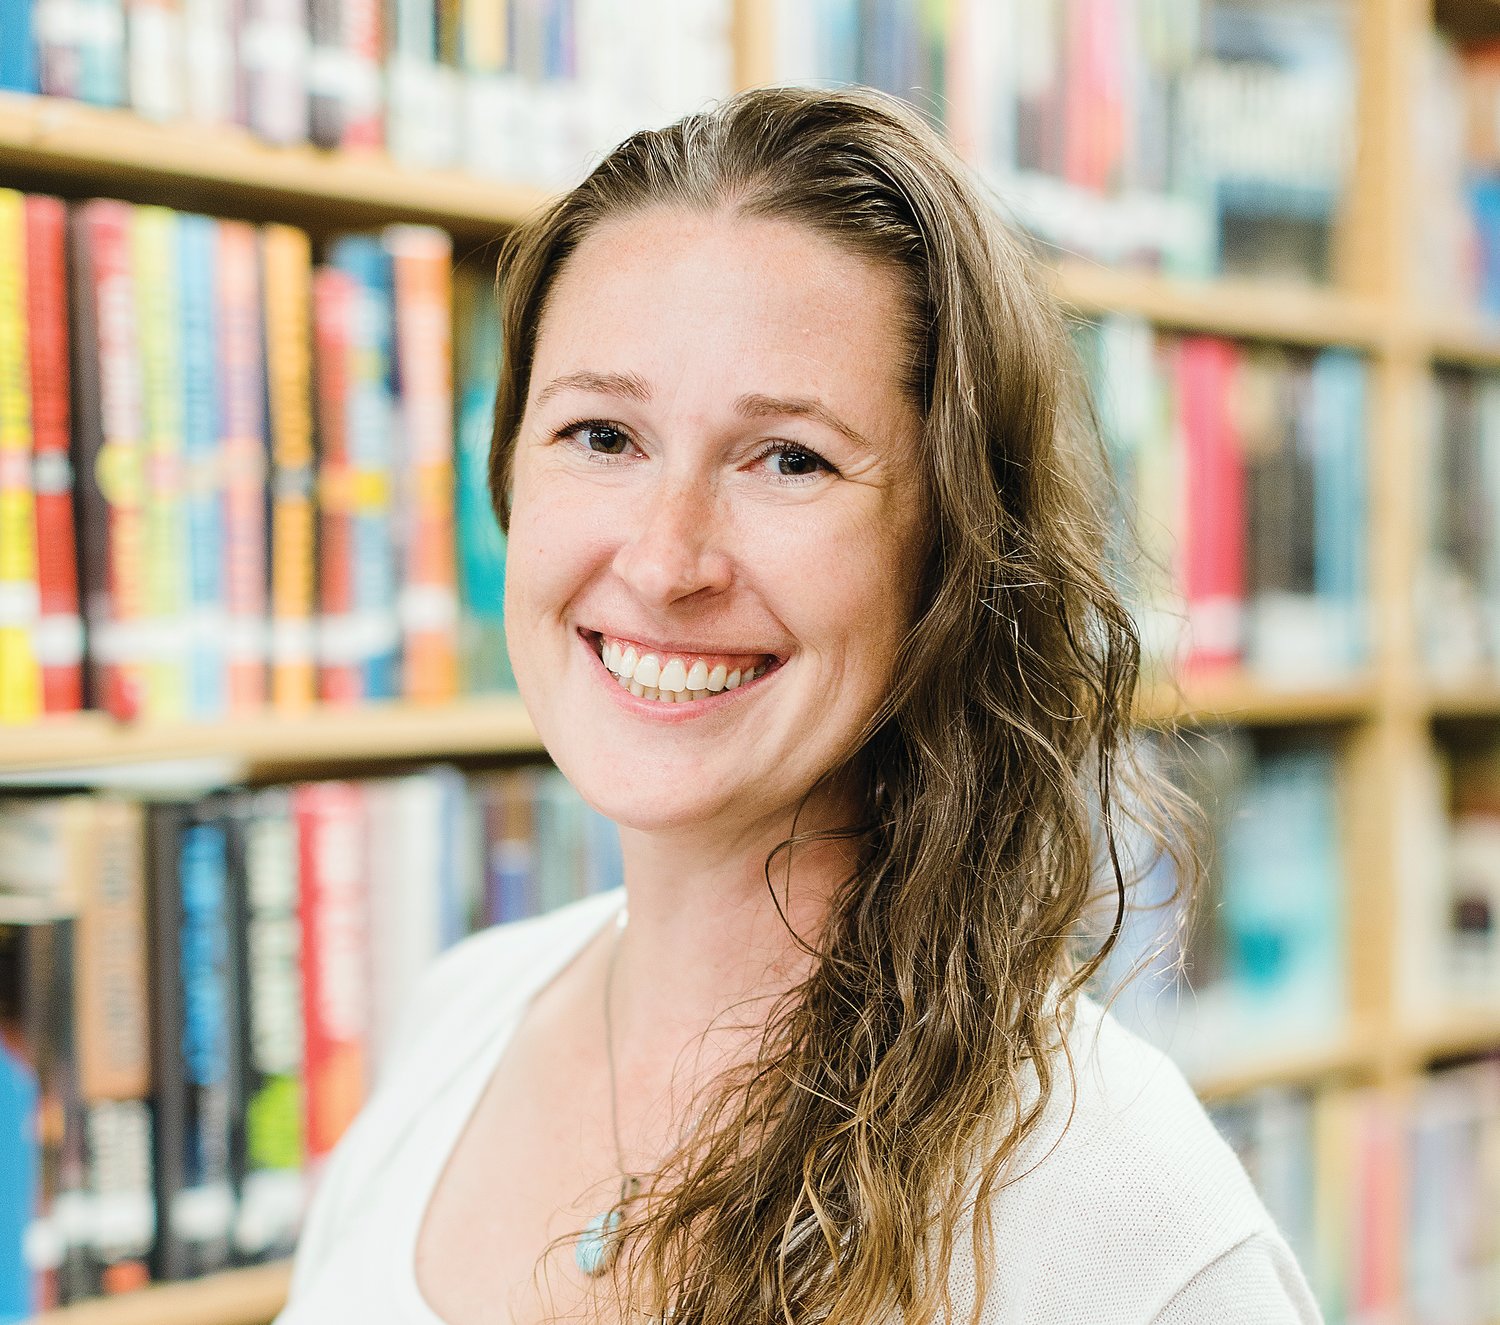 Carrie Geno will be Wellman Library’s new director; she currently works as Assistant Director.